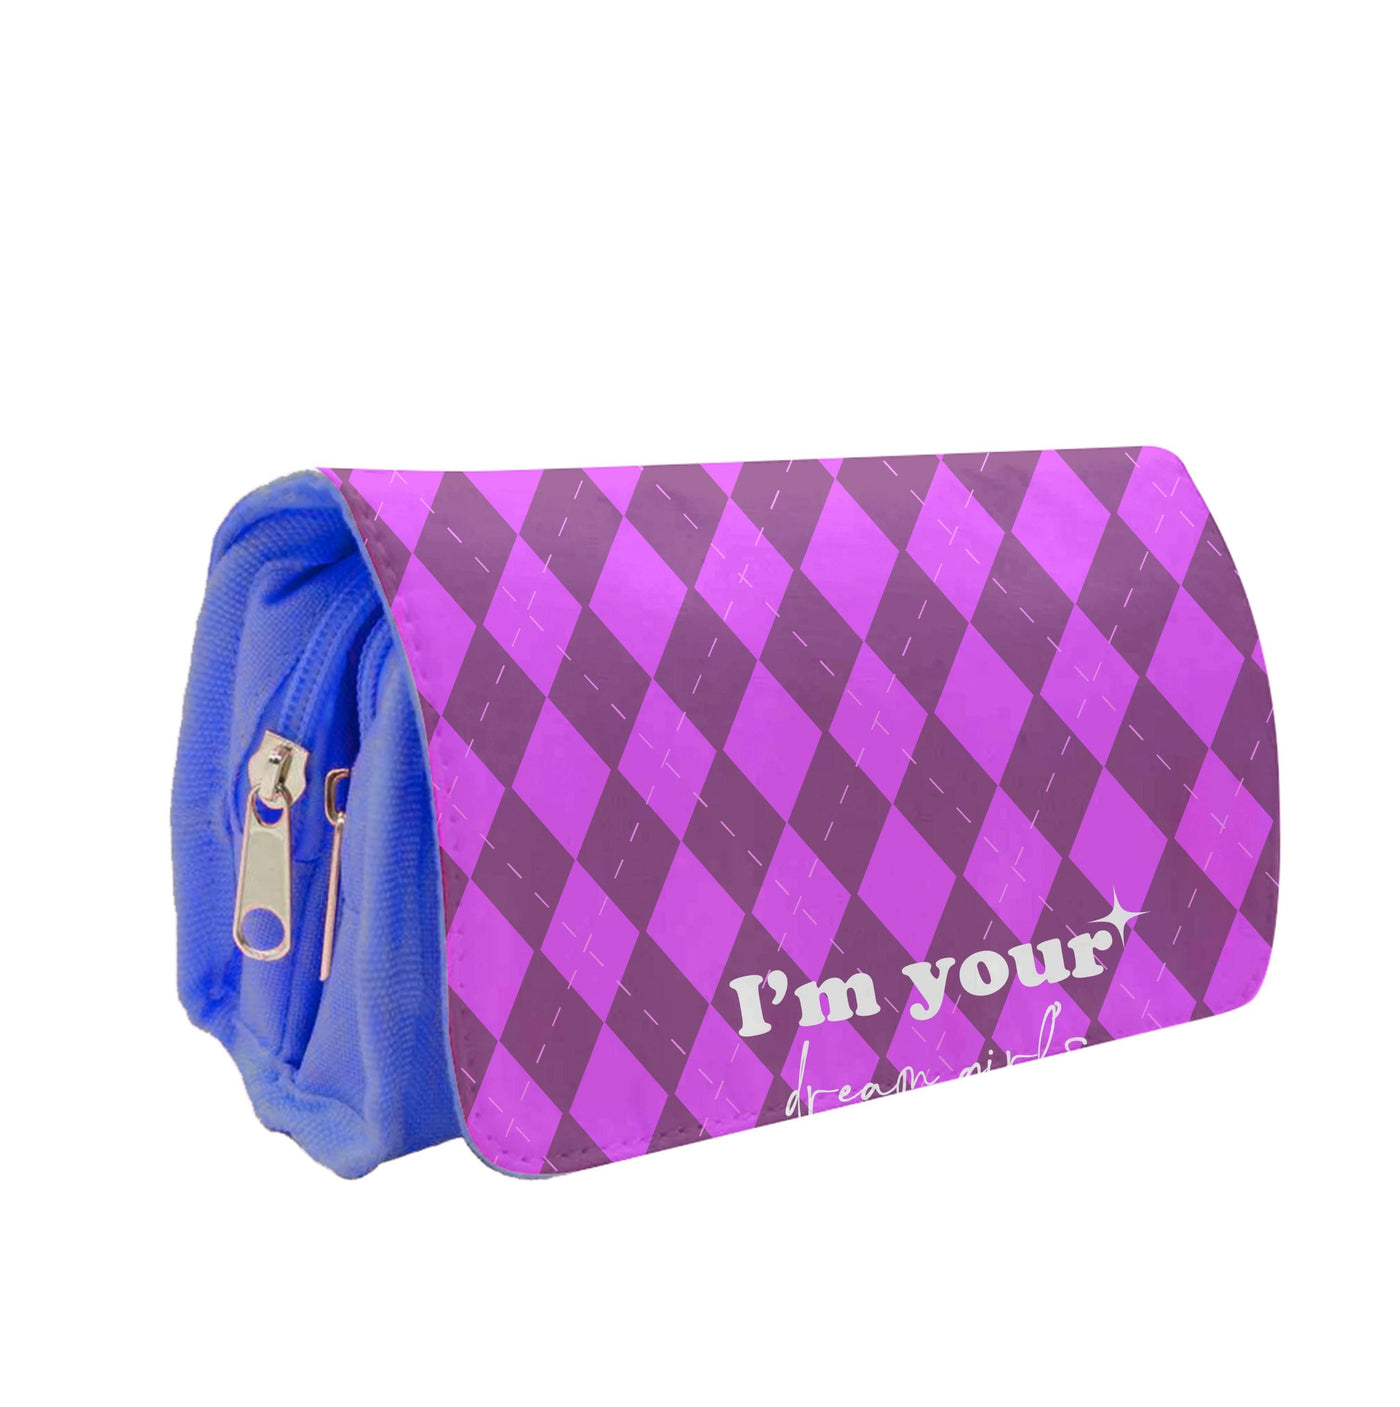 I'm Your Dream Girls Dream Girl - Chappell Roan Pencil Case